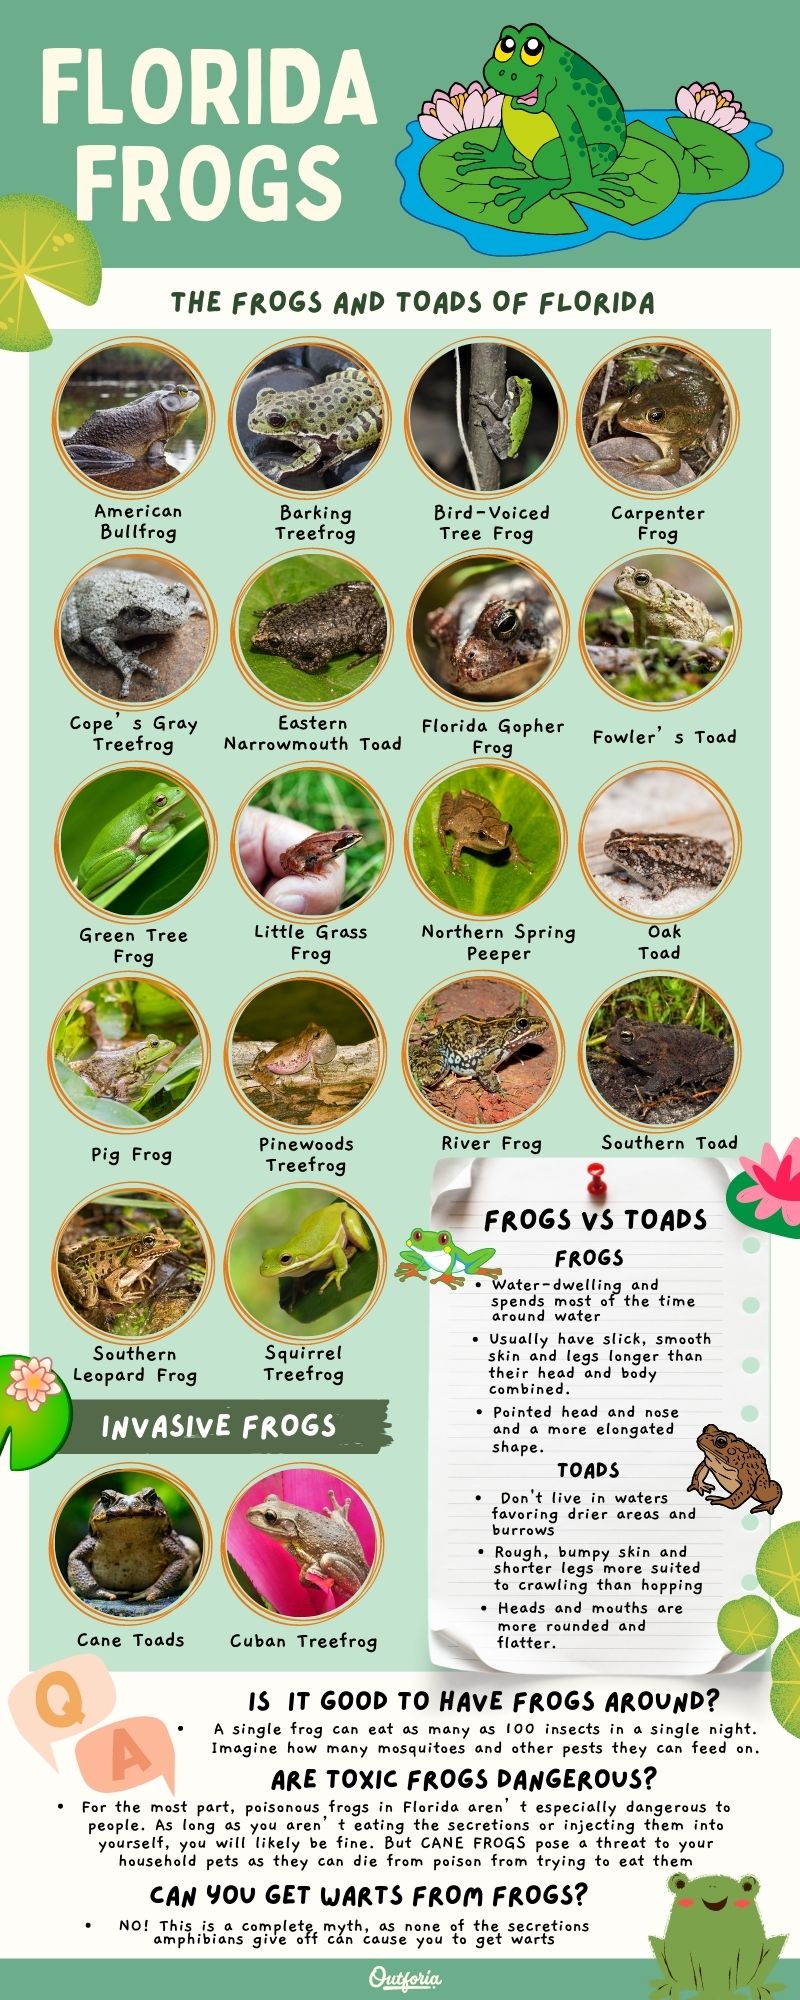 chart of Florida frogs with names, images, frog and toad facts, and FAQ